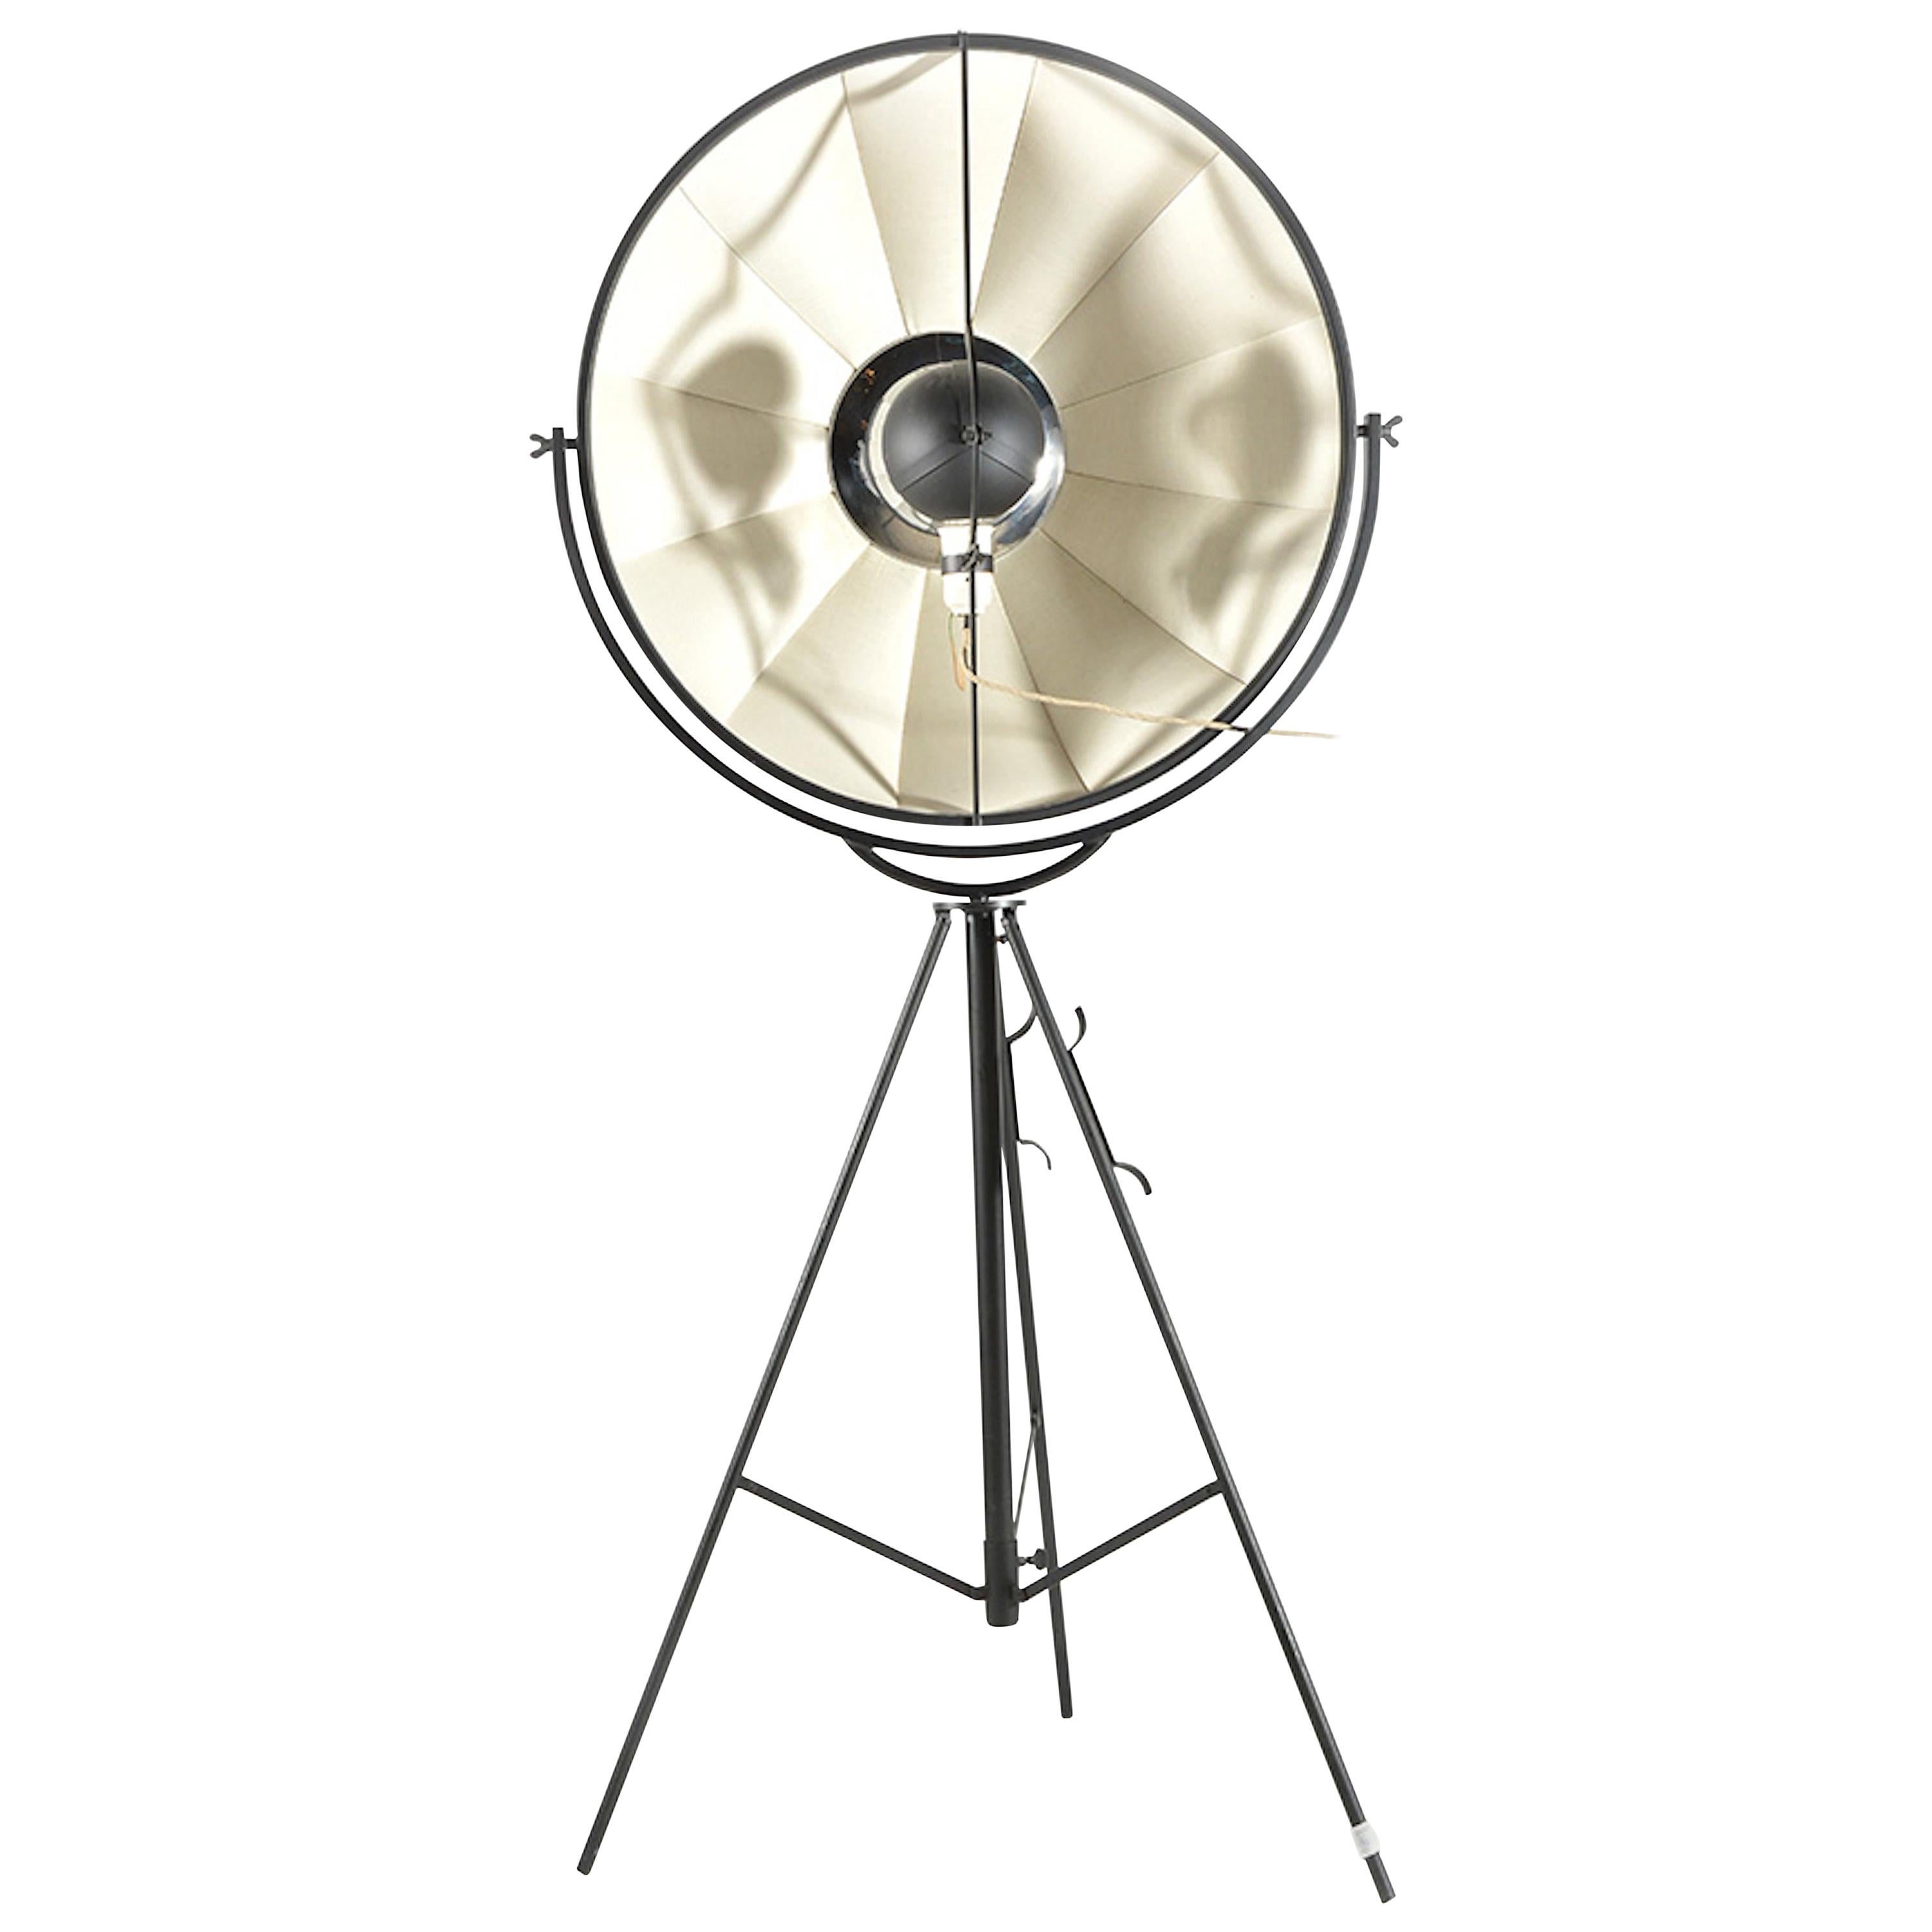 Steel and Cotton Studio Photographer Lamp "Moda" by Mariano Fortuny